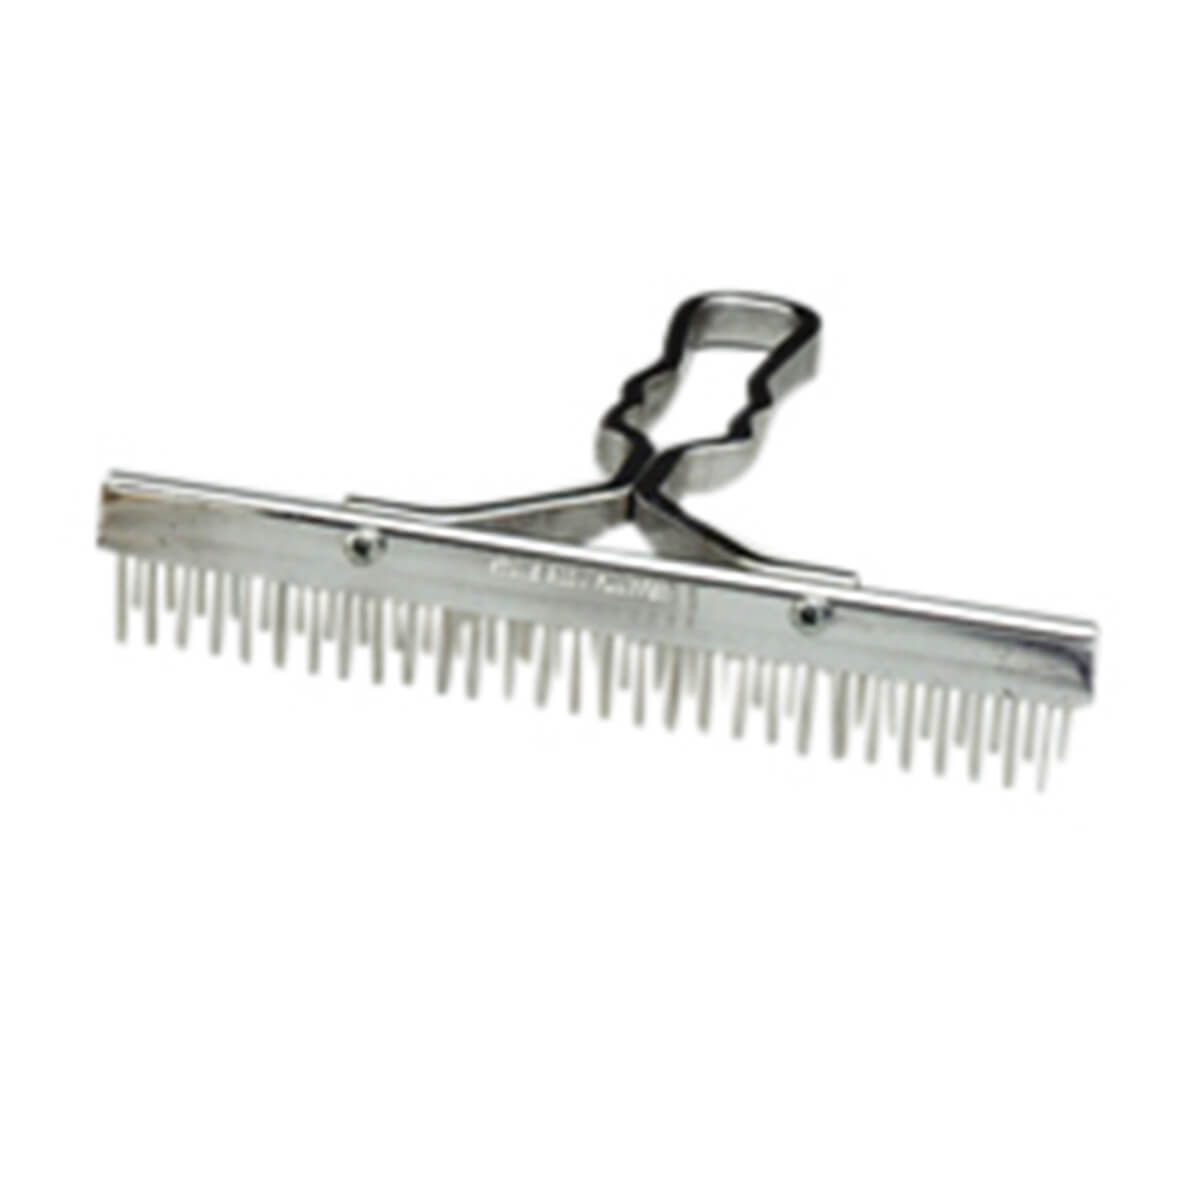 Standard Grooming Comb with Aluminum Handle - 9-in